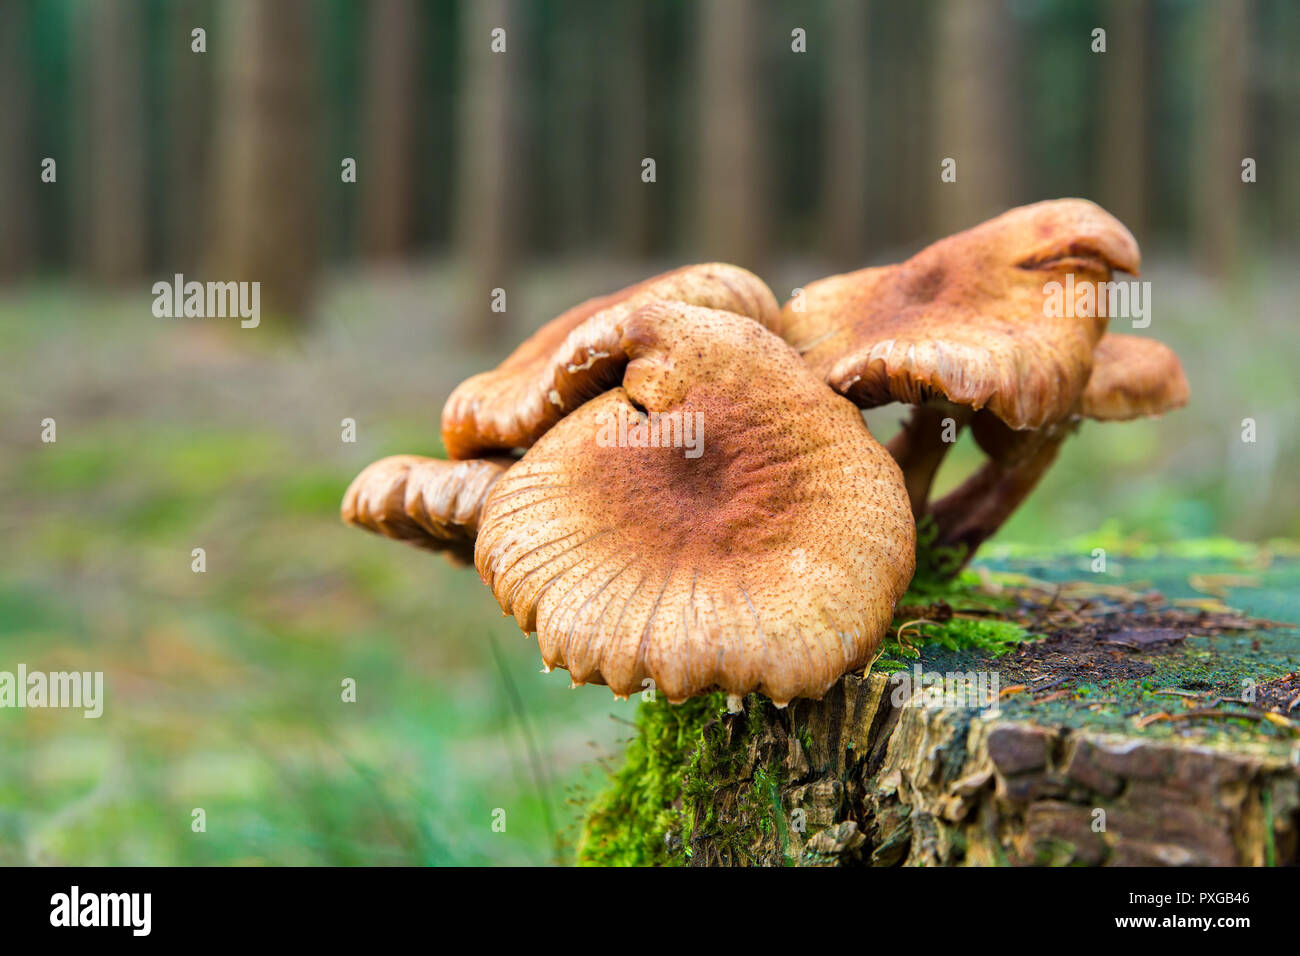 Group of brown mushrooms on tree stump in forest Stock Photo